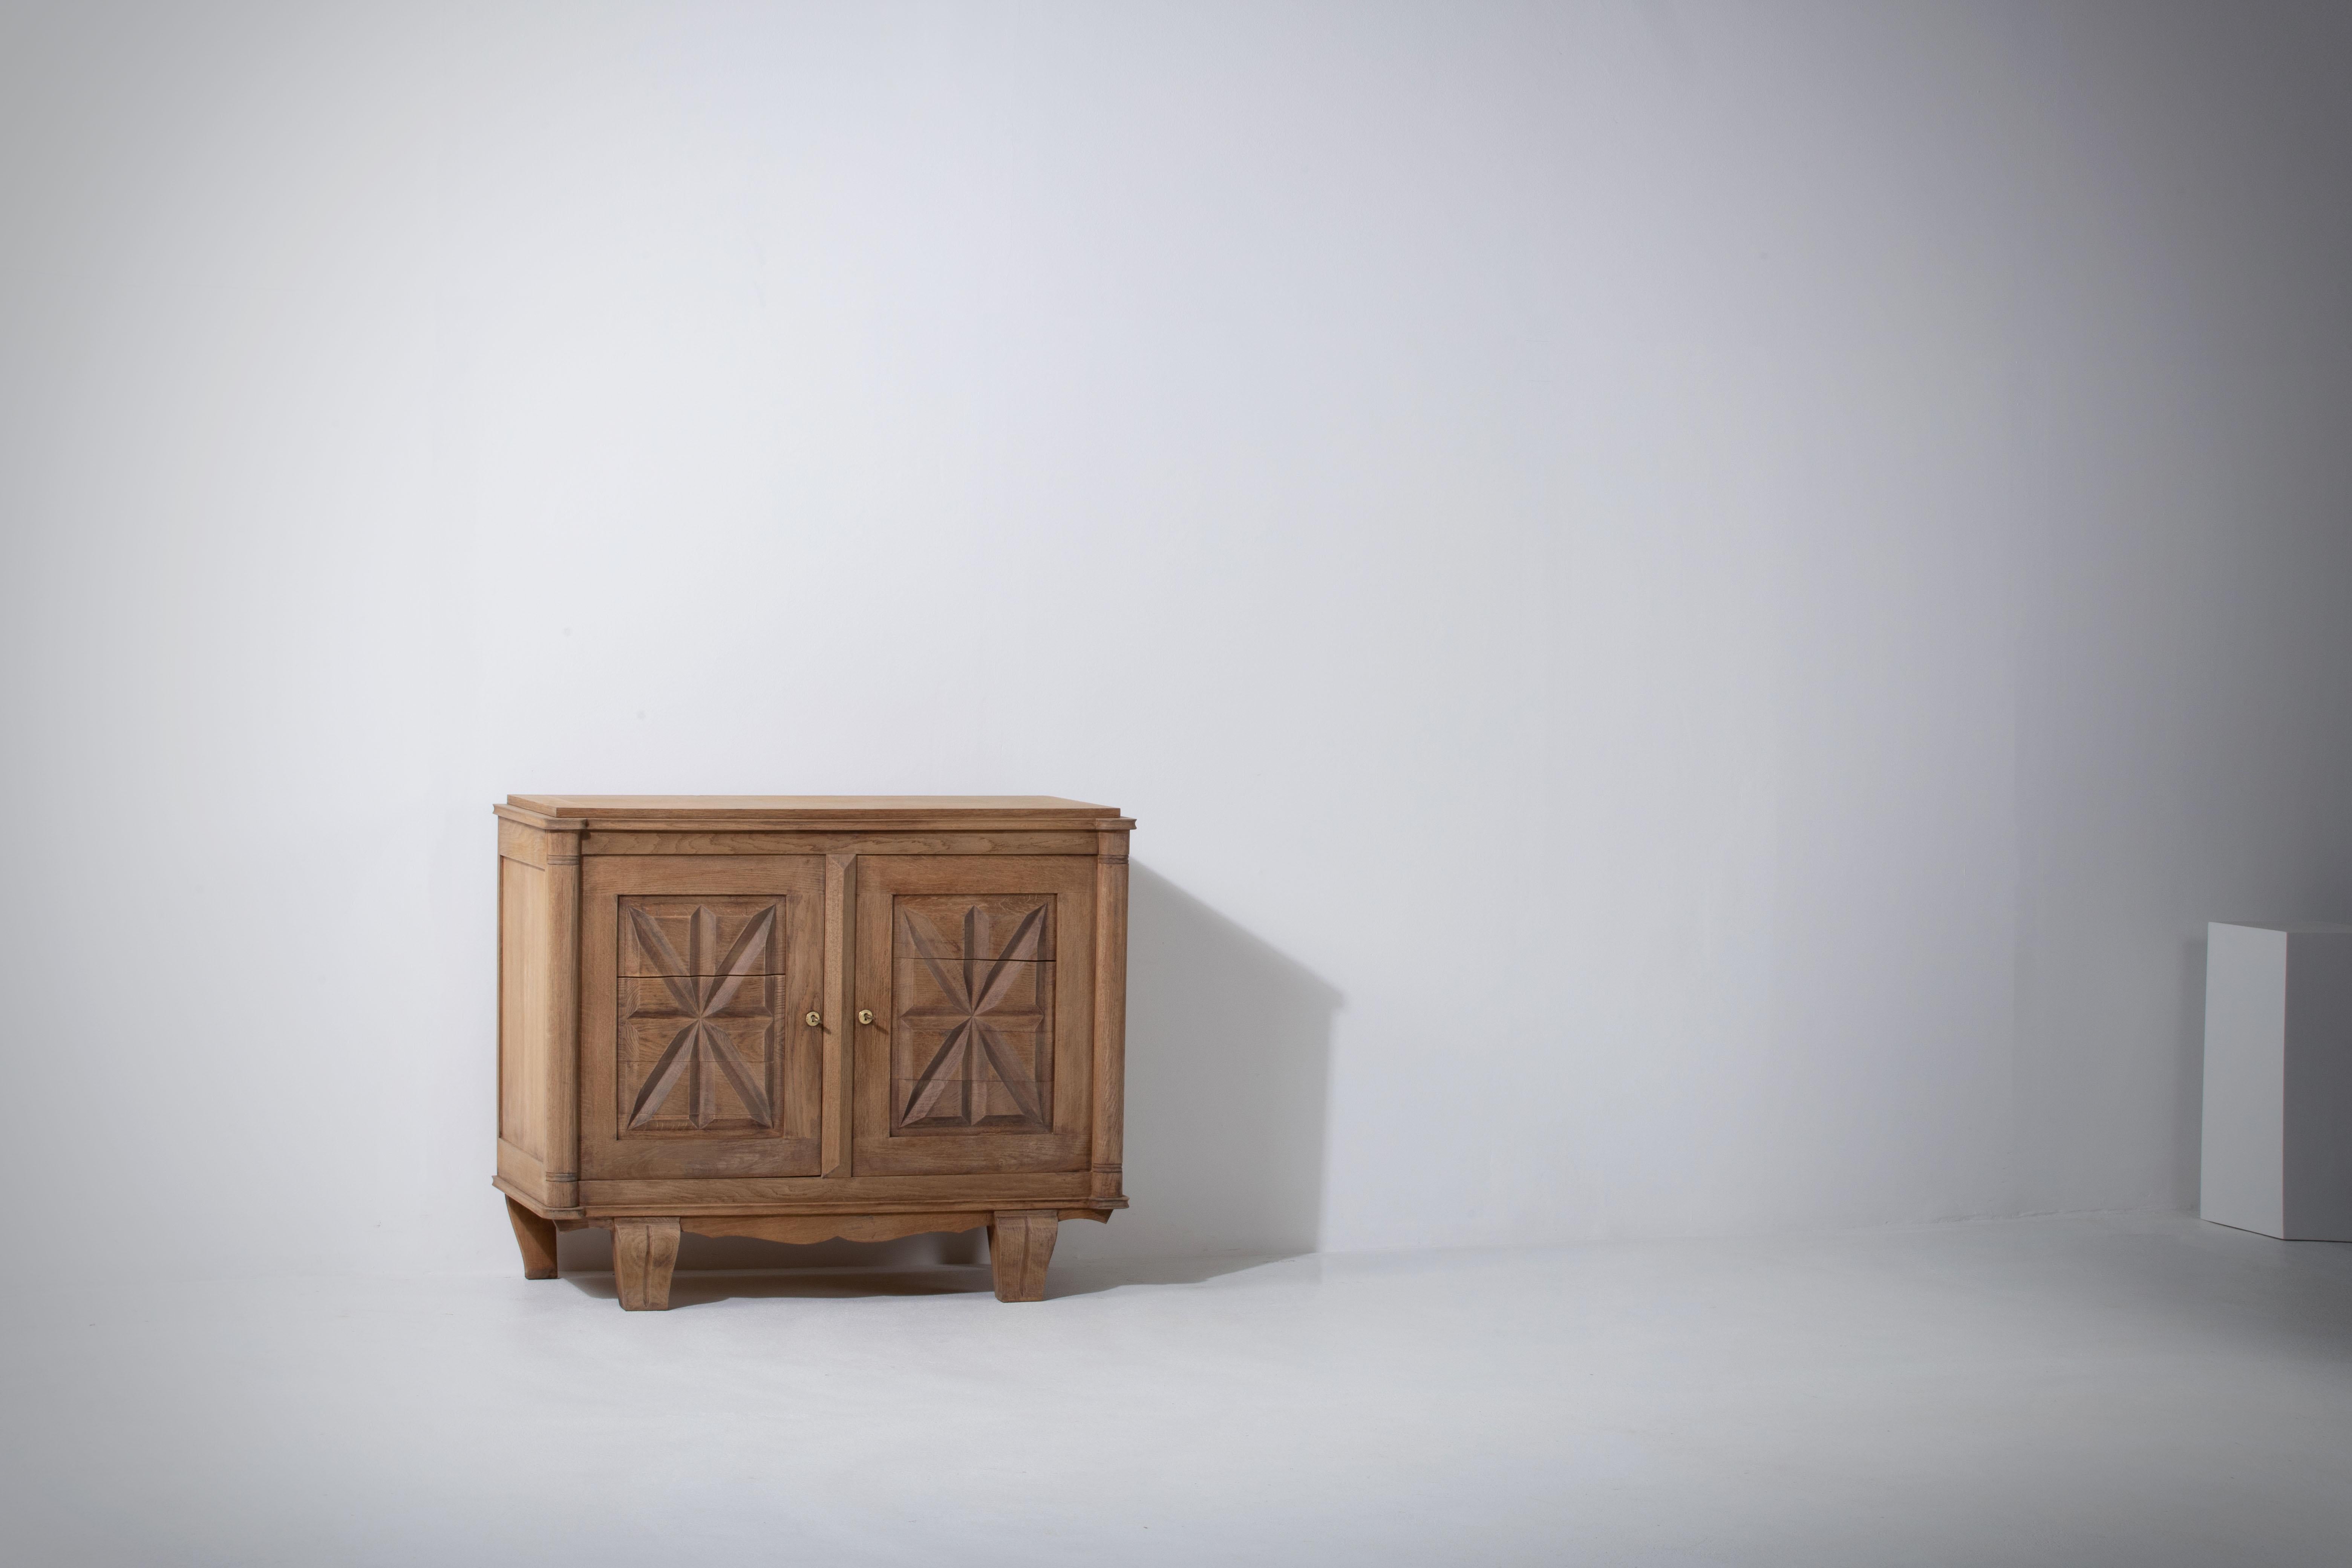 Mid-20th Century Solid Oak Credenza with Graphic Details, France, 1940s For Sale